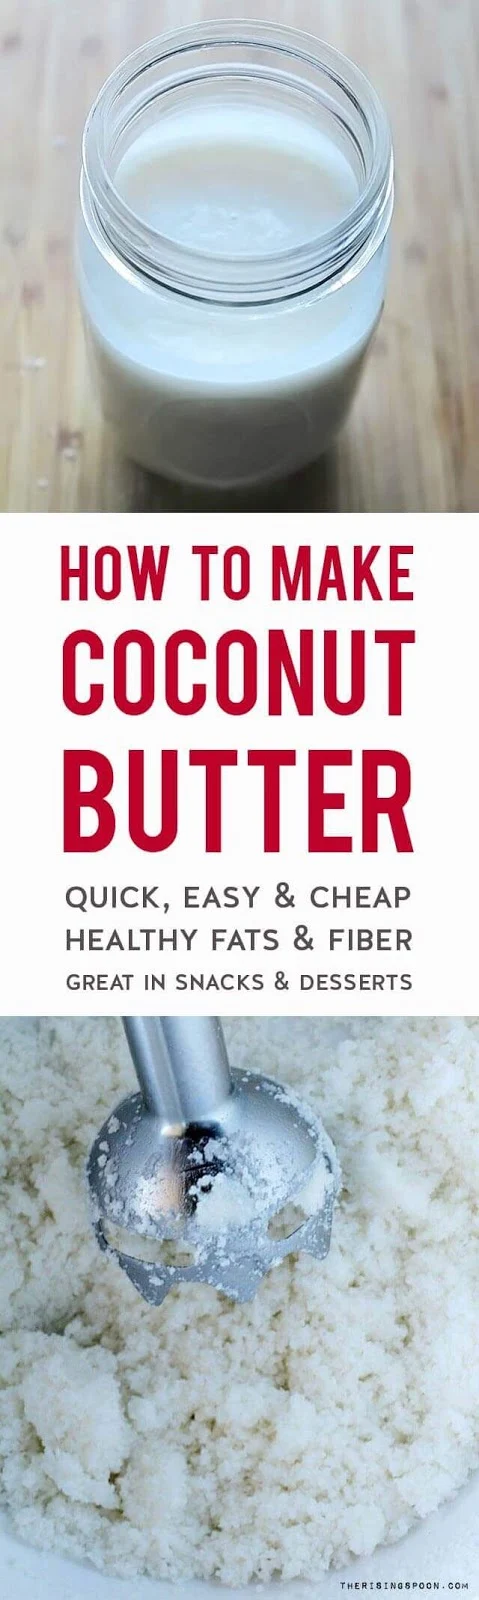 Learn how to make coconut butter at home in about 10-15 minutes with a bag of dried coconut flakes and an immersion blender + regular blender. This recipe is so cheap & easy! Use coconut butter (also called coconut manna) in place of peanut or almond butter in your favorite snacks and desserts for extra fiber and healthy fats.